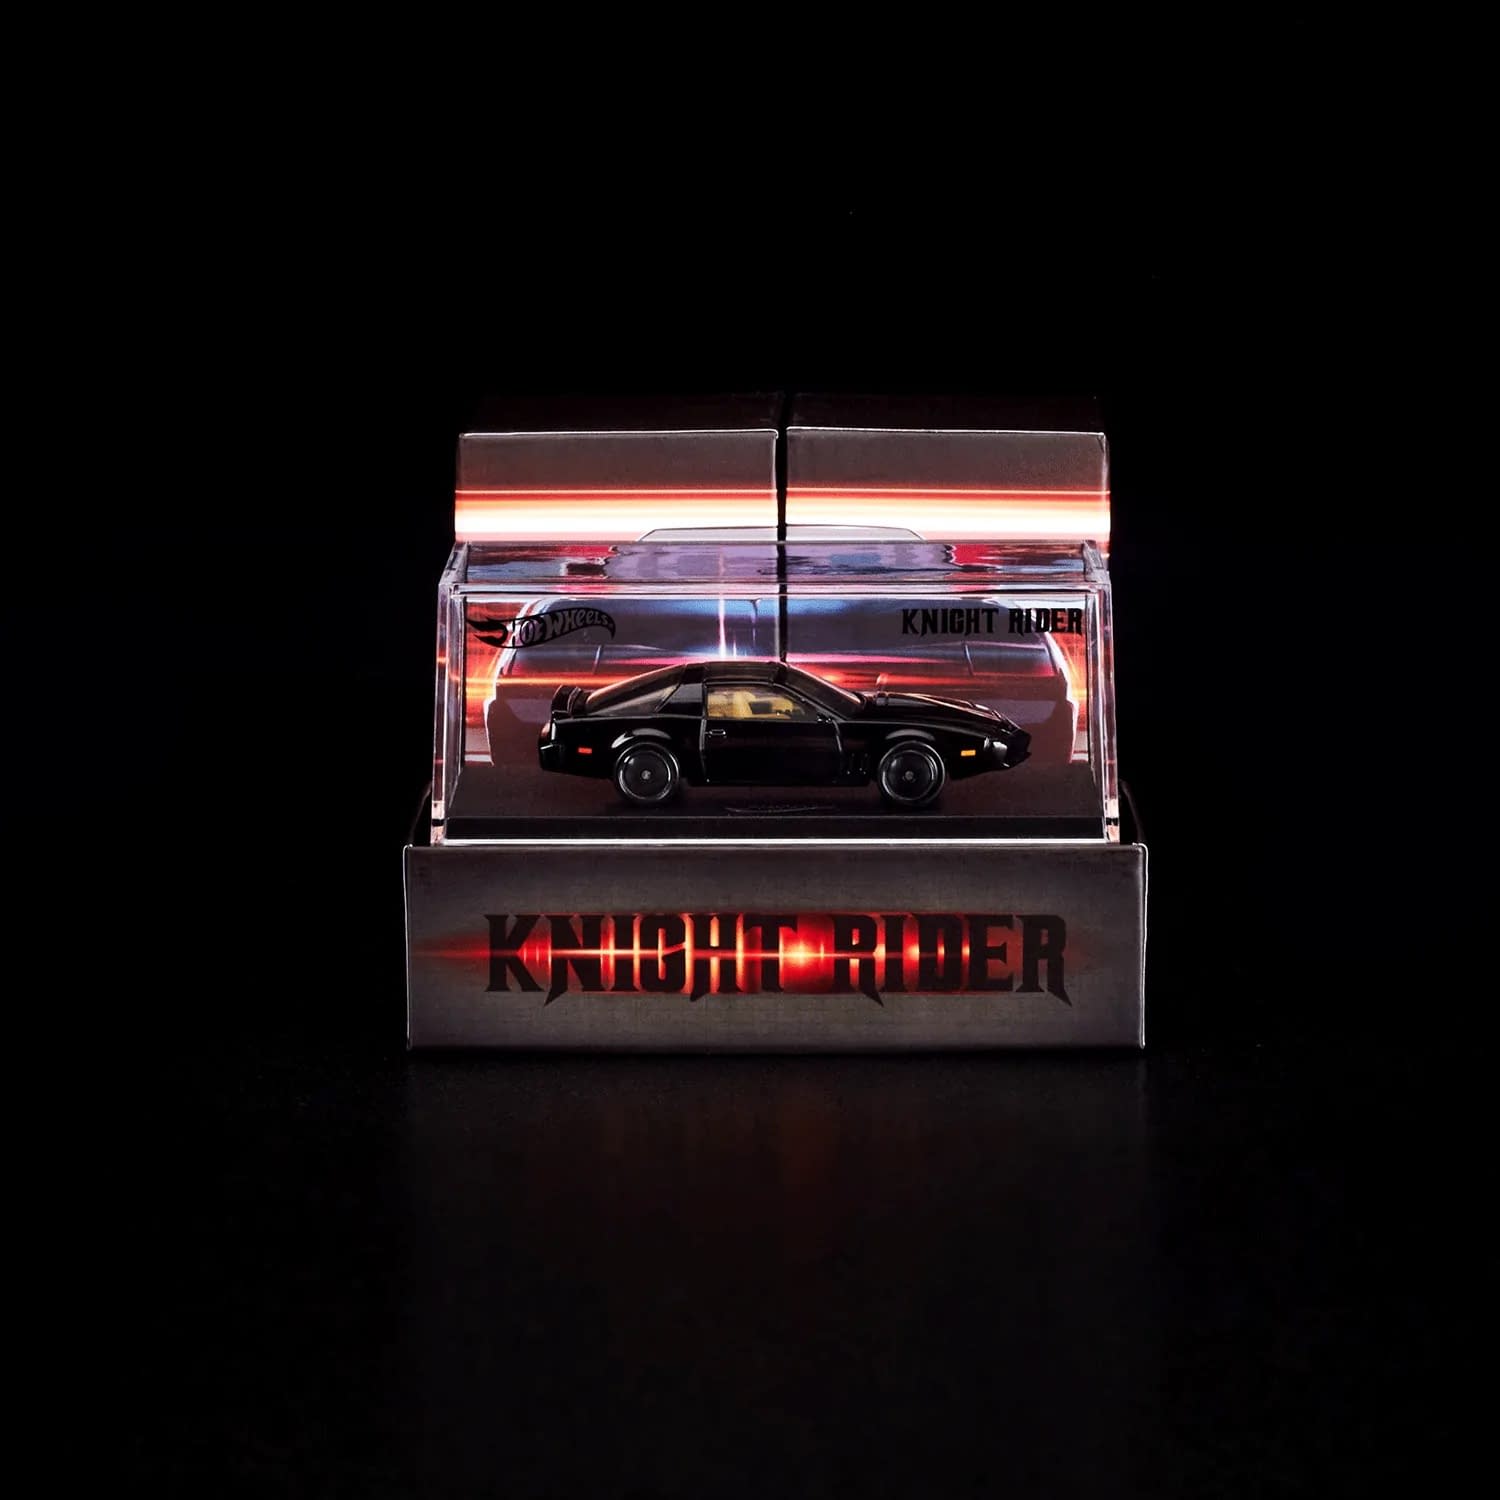 Knight Rider Comes to SDCC 2022 with Hot Wheels Exclusive Car